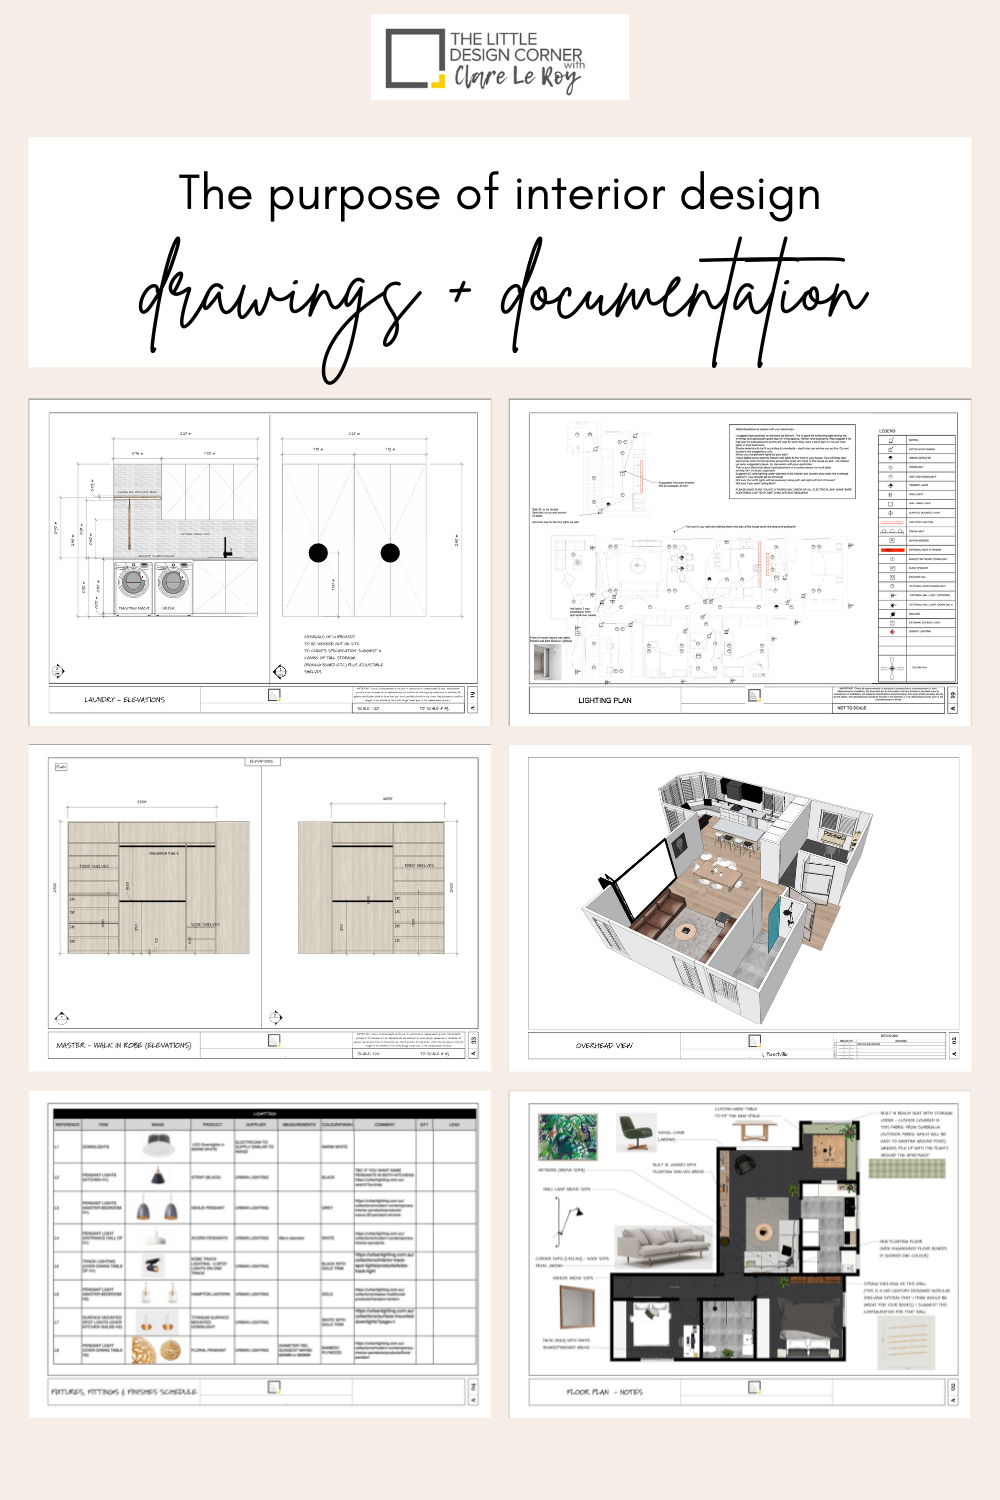 The purpose of interior design drawings and documentation